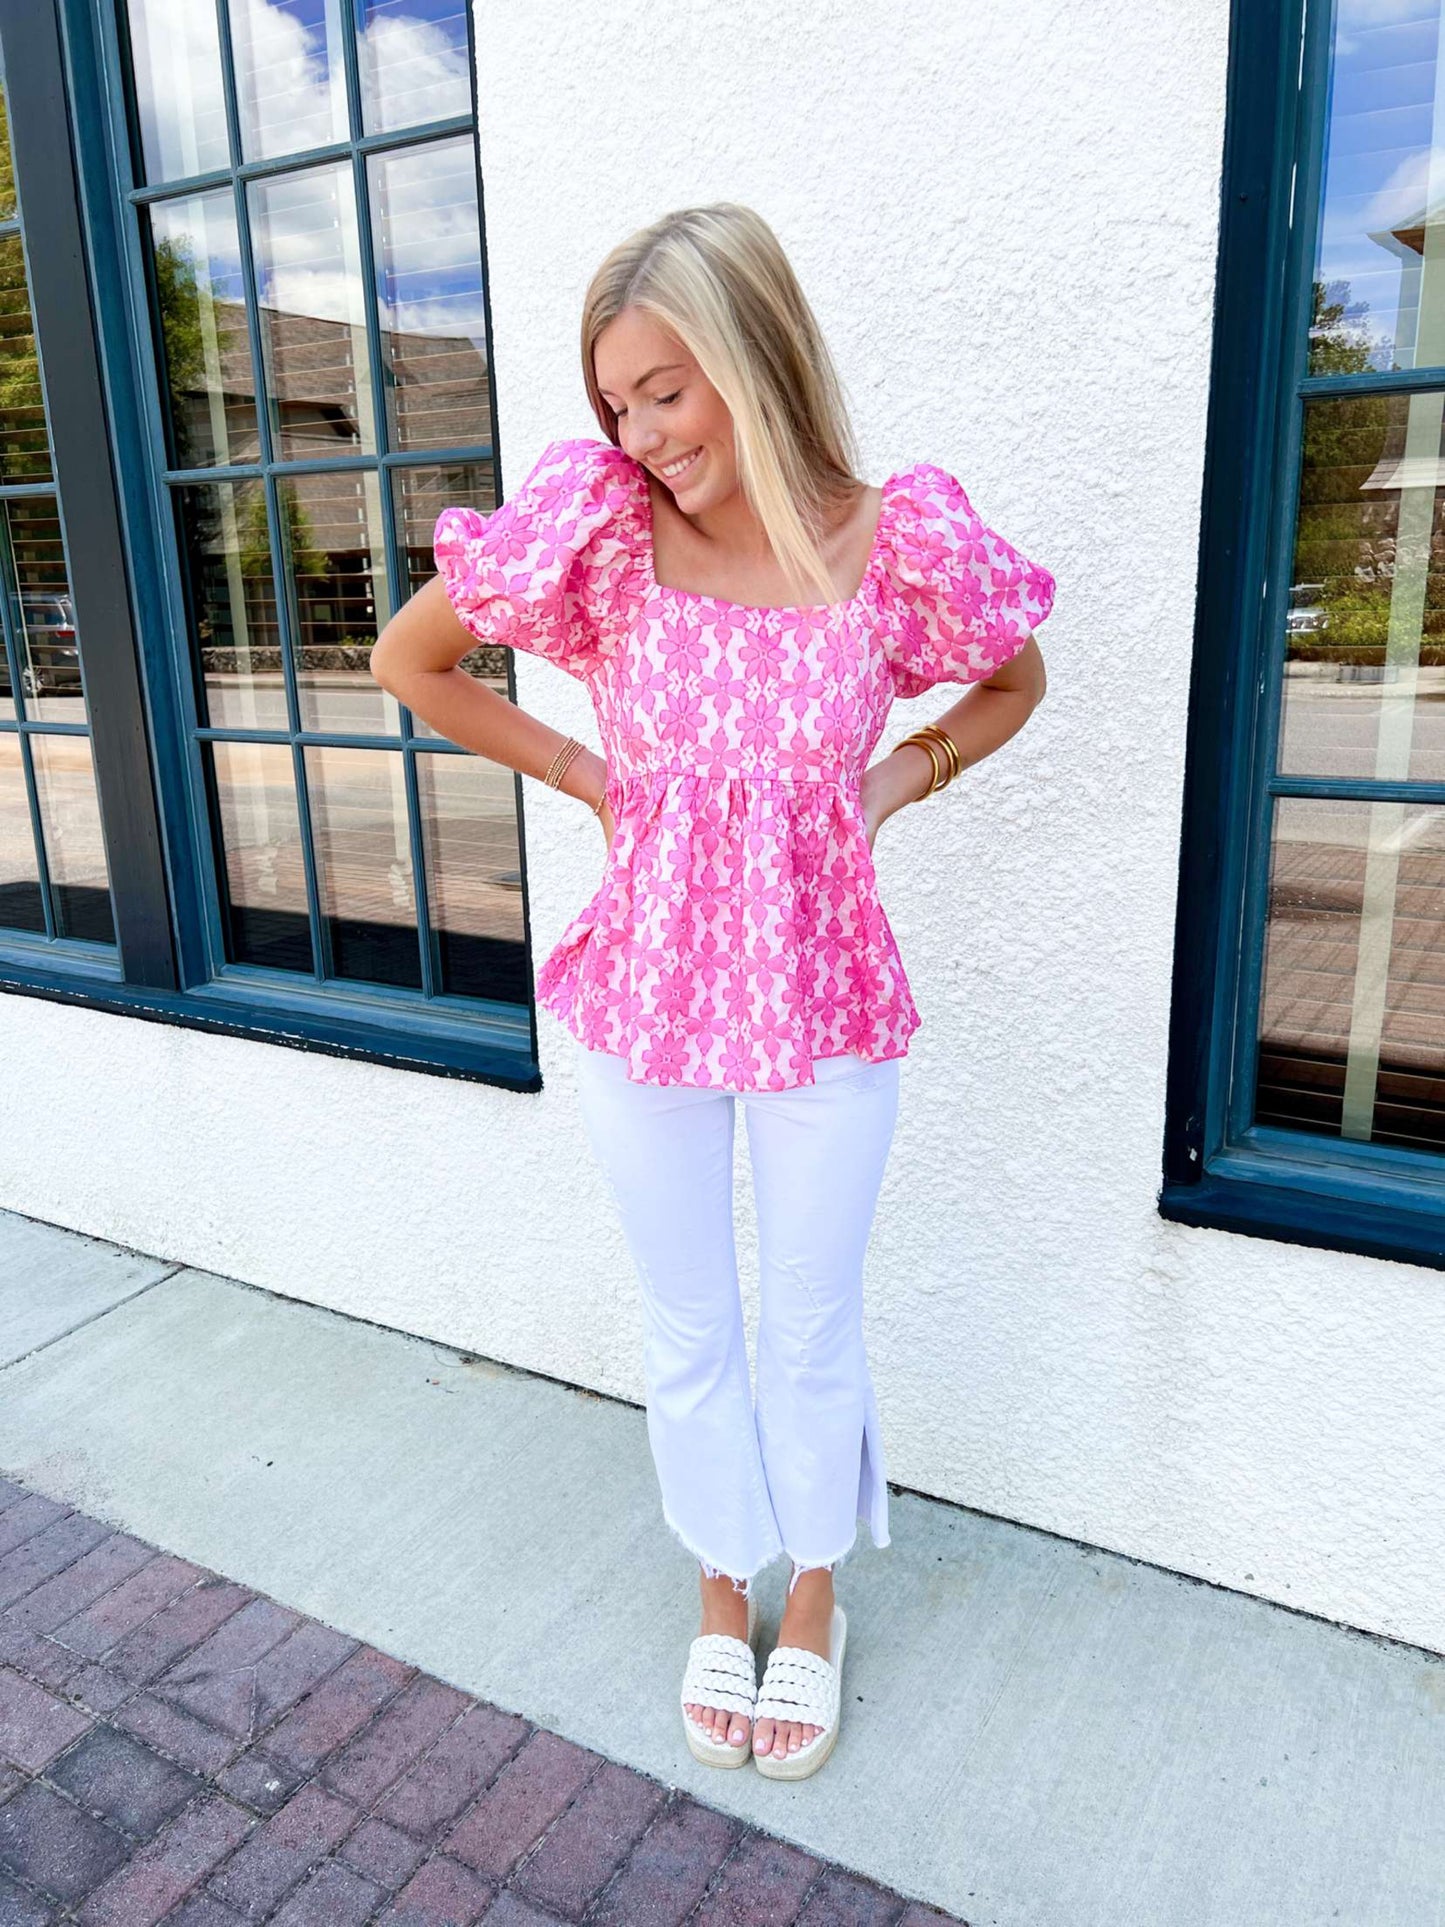 The Pink Confection Top